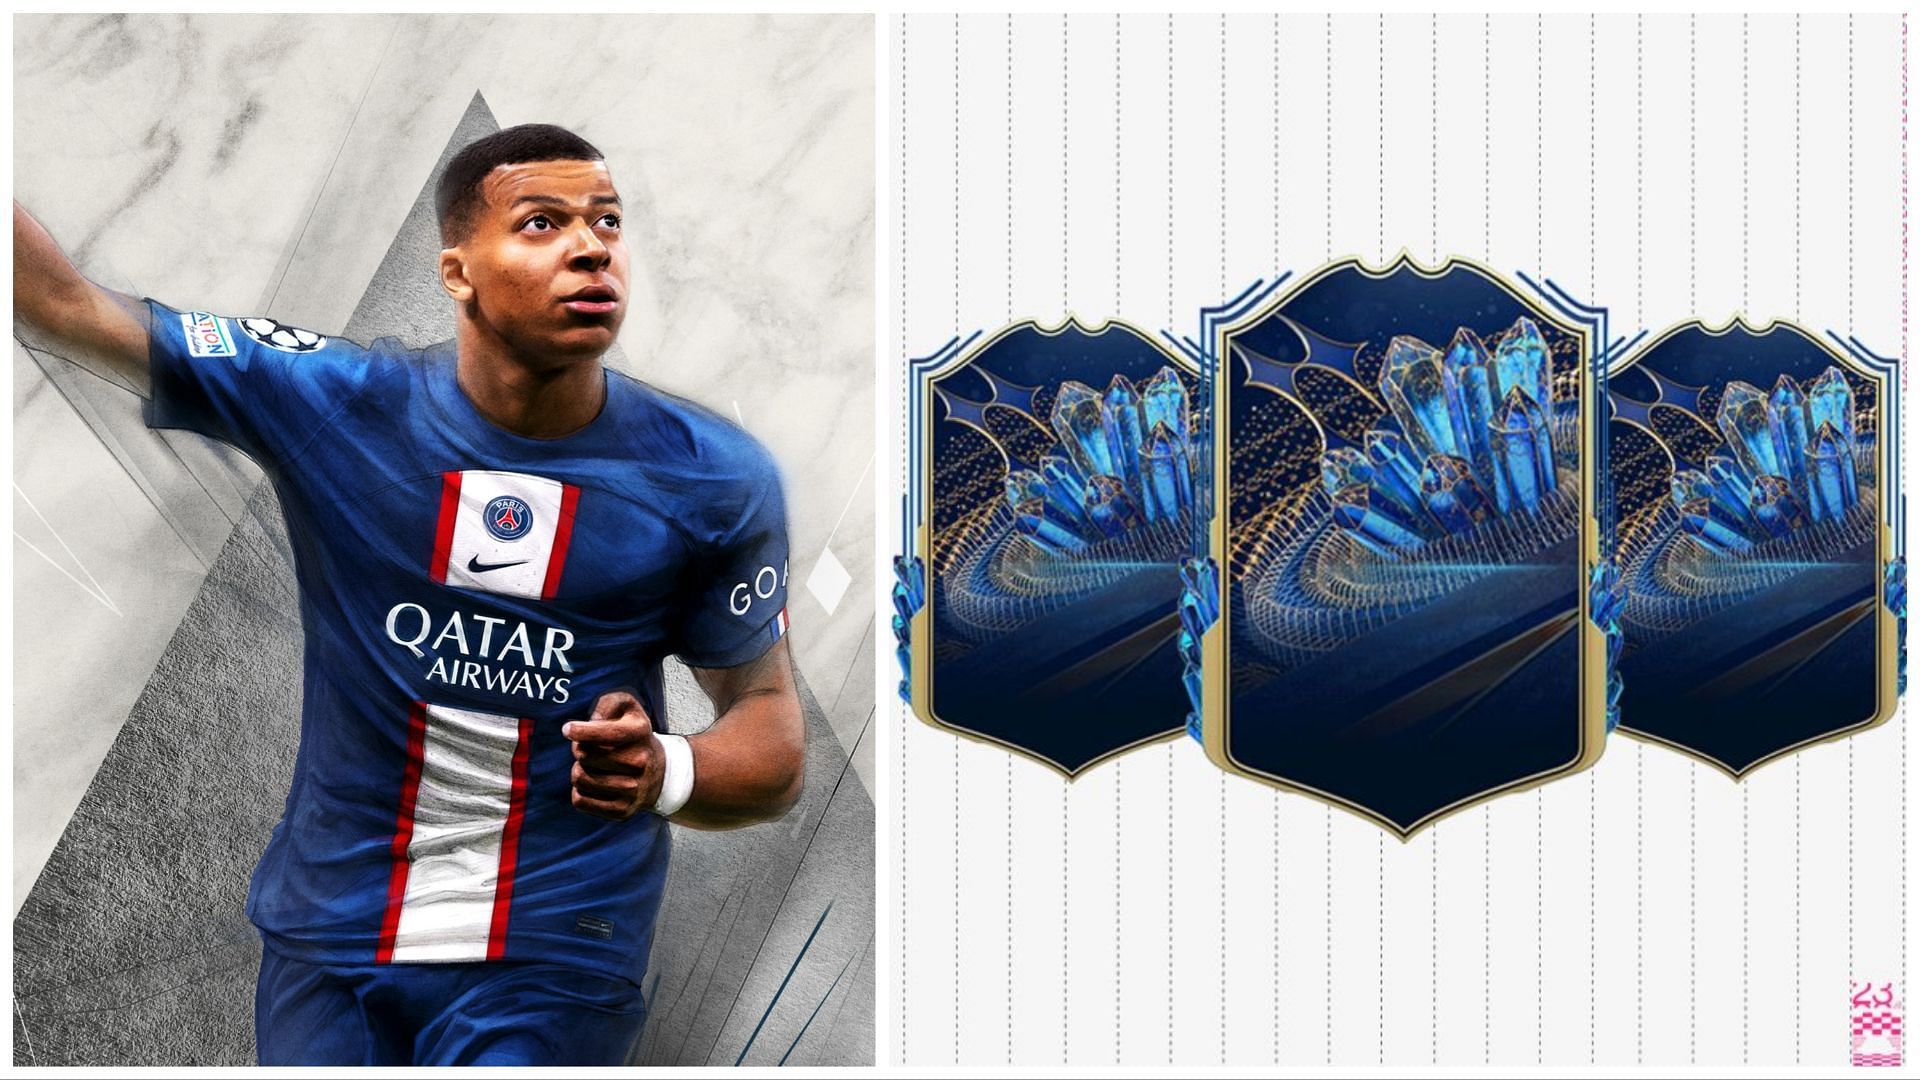 TOTS will arrive soon in FIFA 23 (Images via EA Sports)